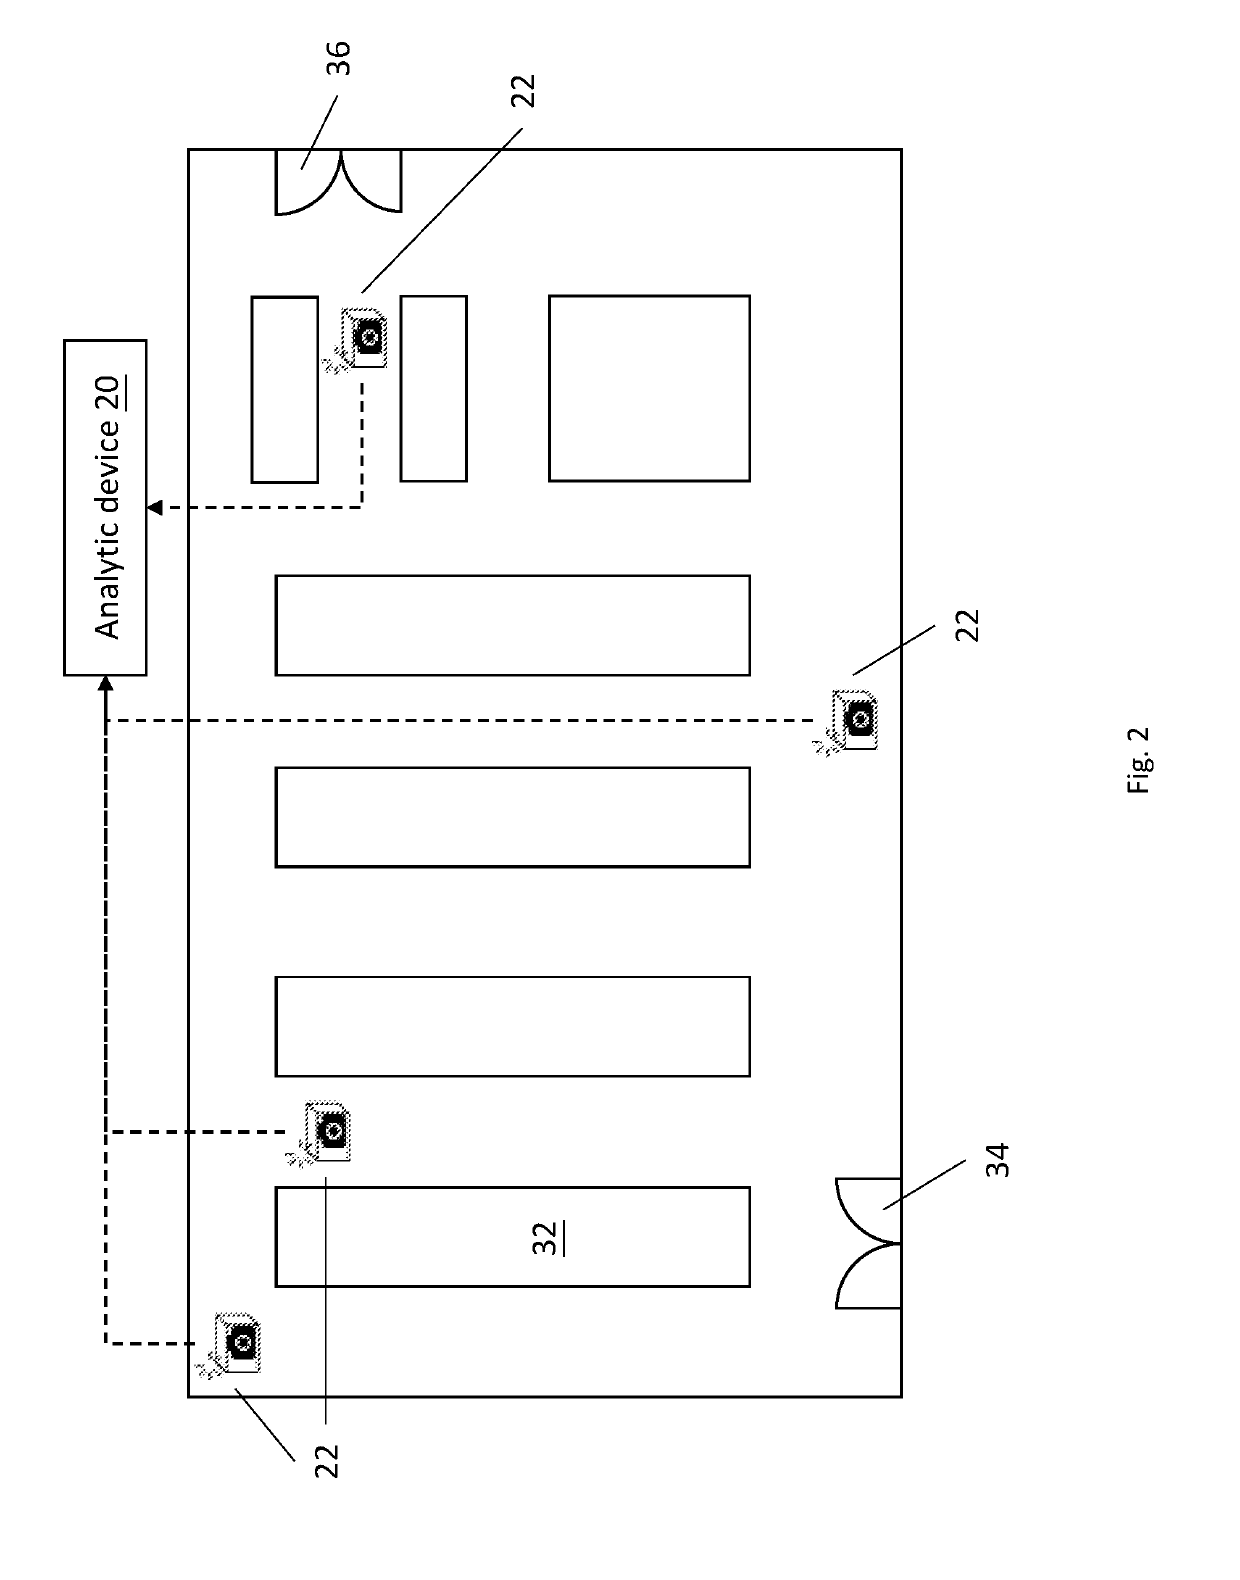 Visual and geolocation analytic system and method